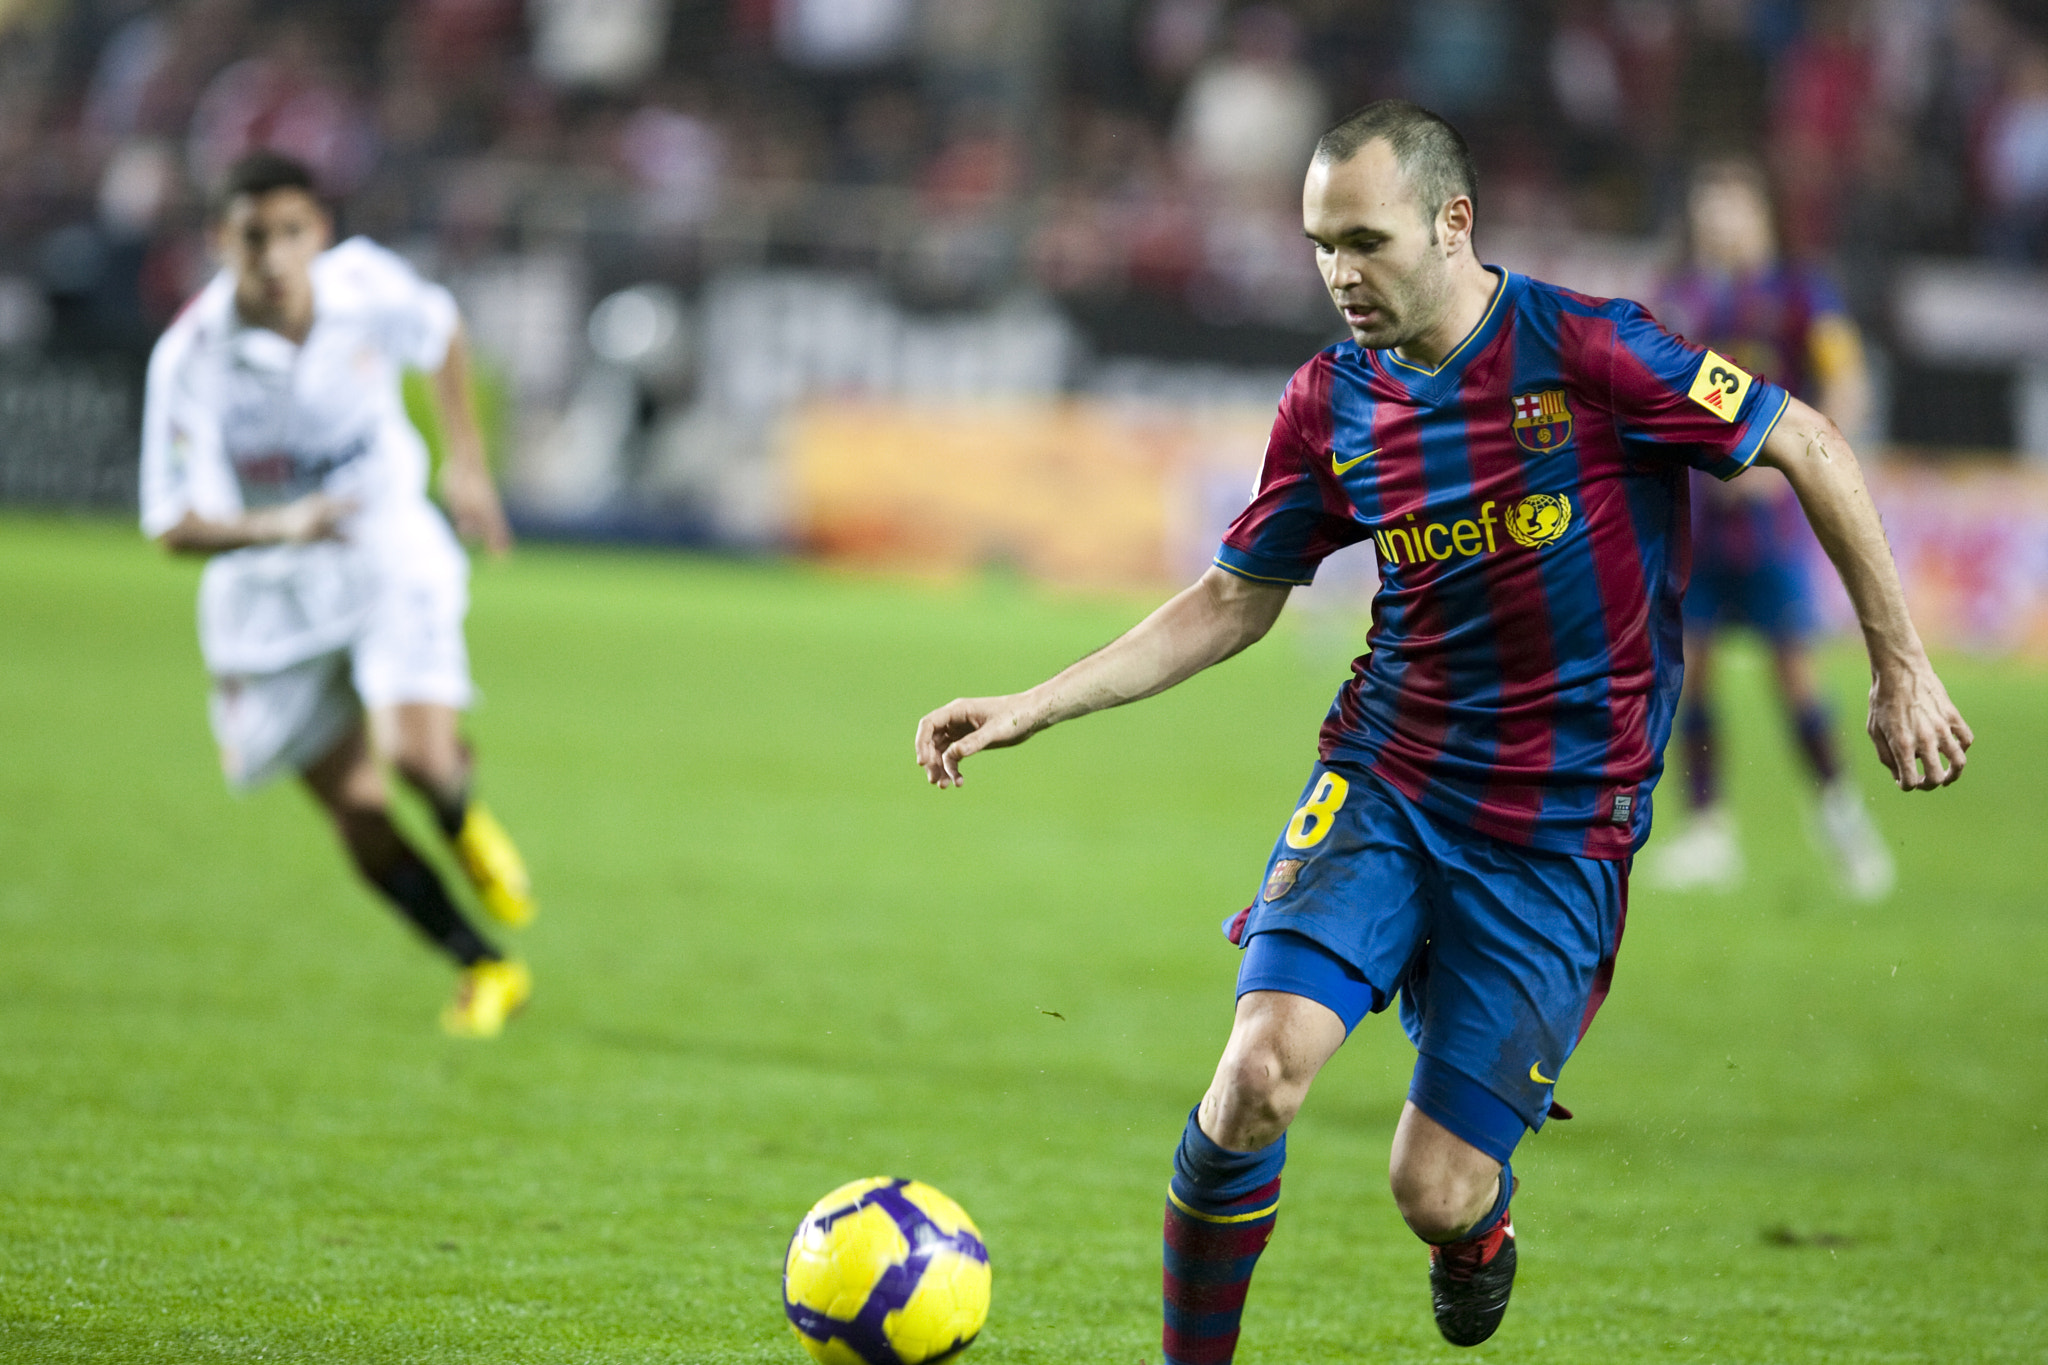 Iniesta with the ball. Spanish Cup game between Sevilla FC and FC Barcelona, Ramon Sanchez Pizjuan s